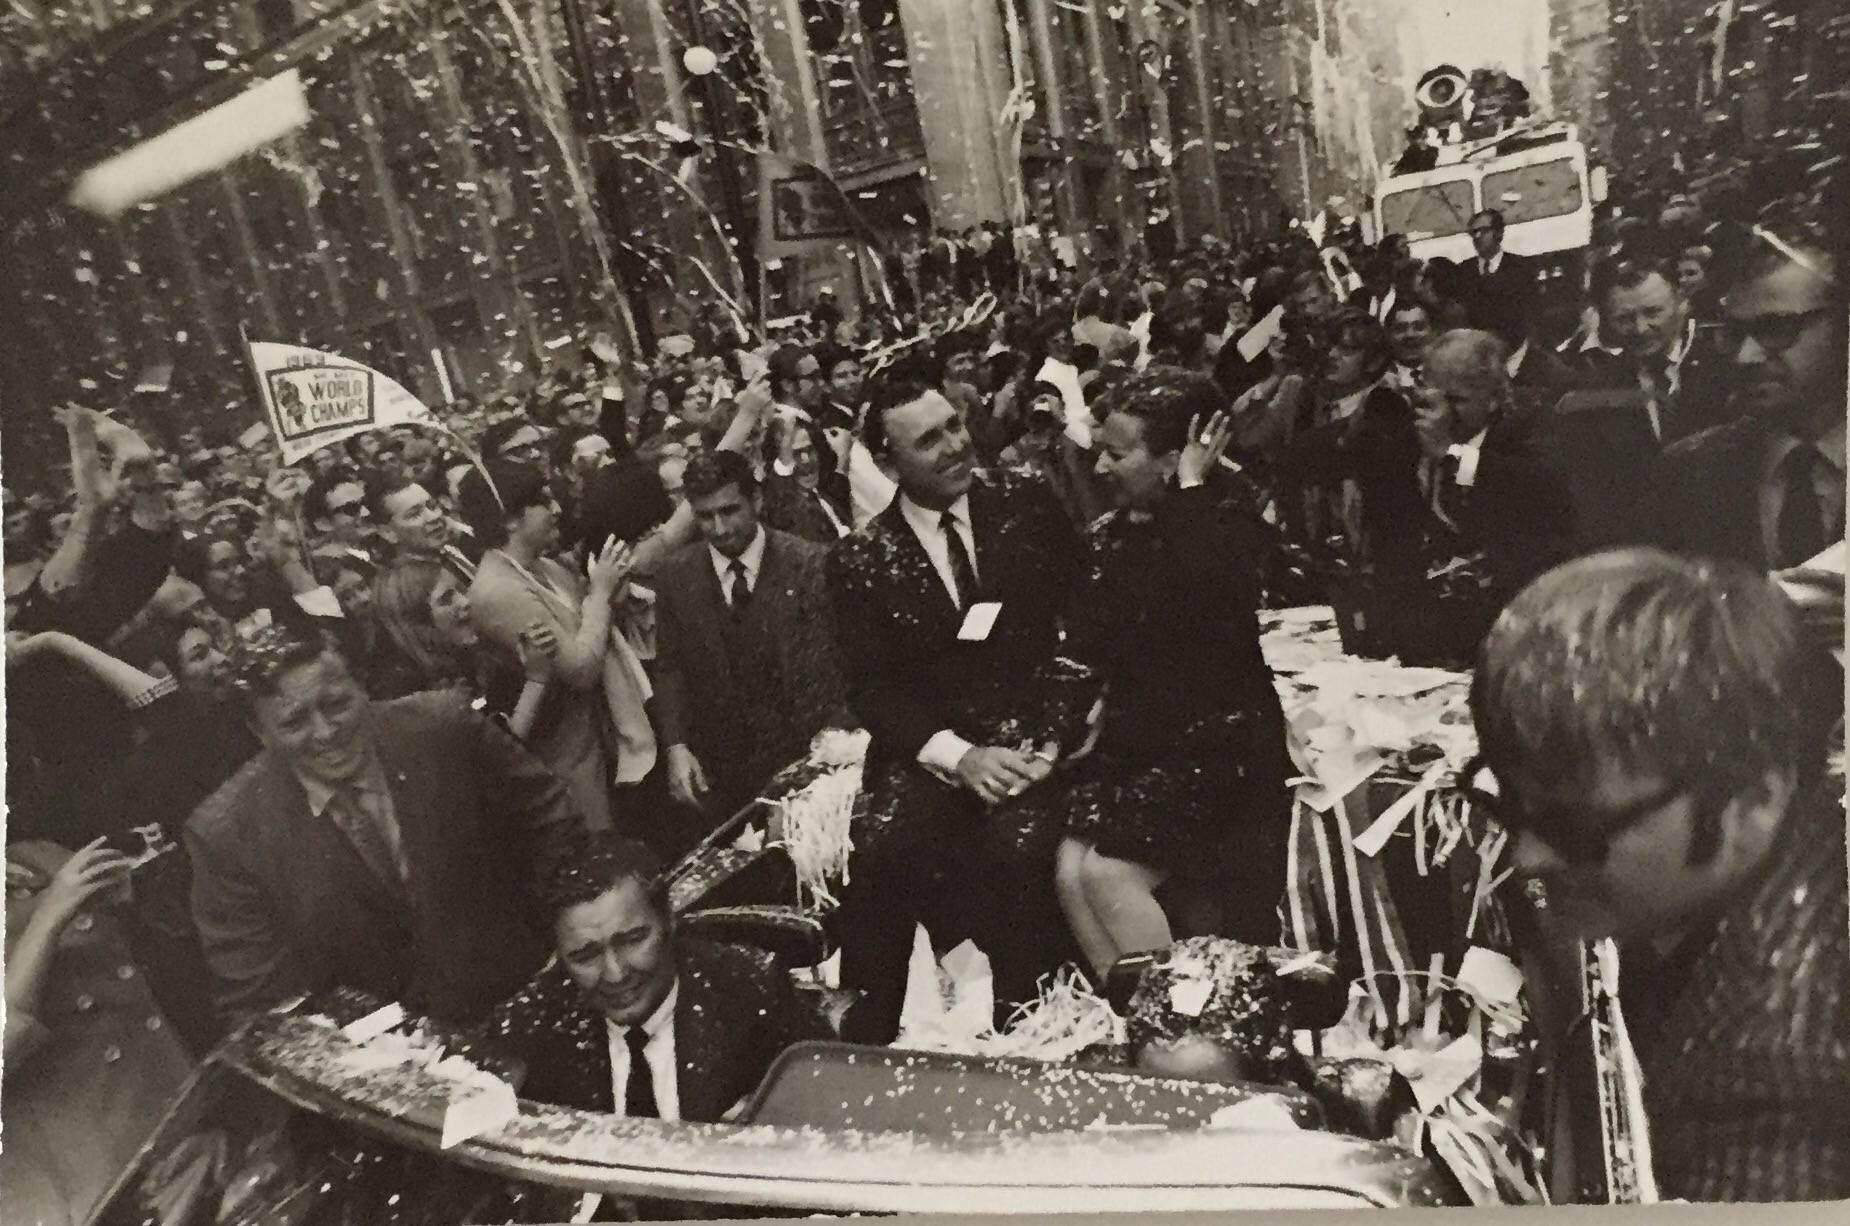 Fred McDarrah Black and White Photograph - World Champions Mets Parade - October 1969